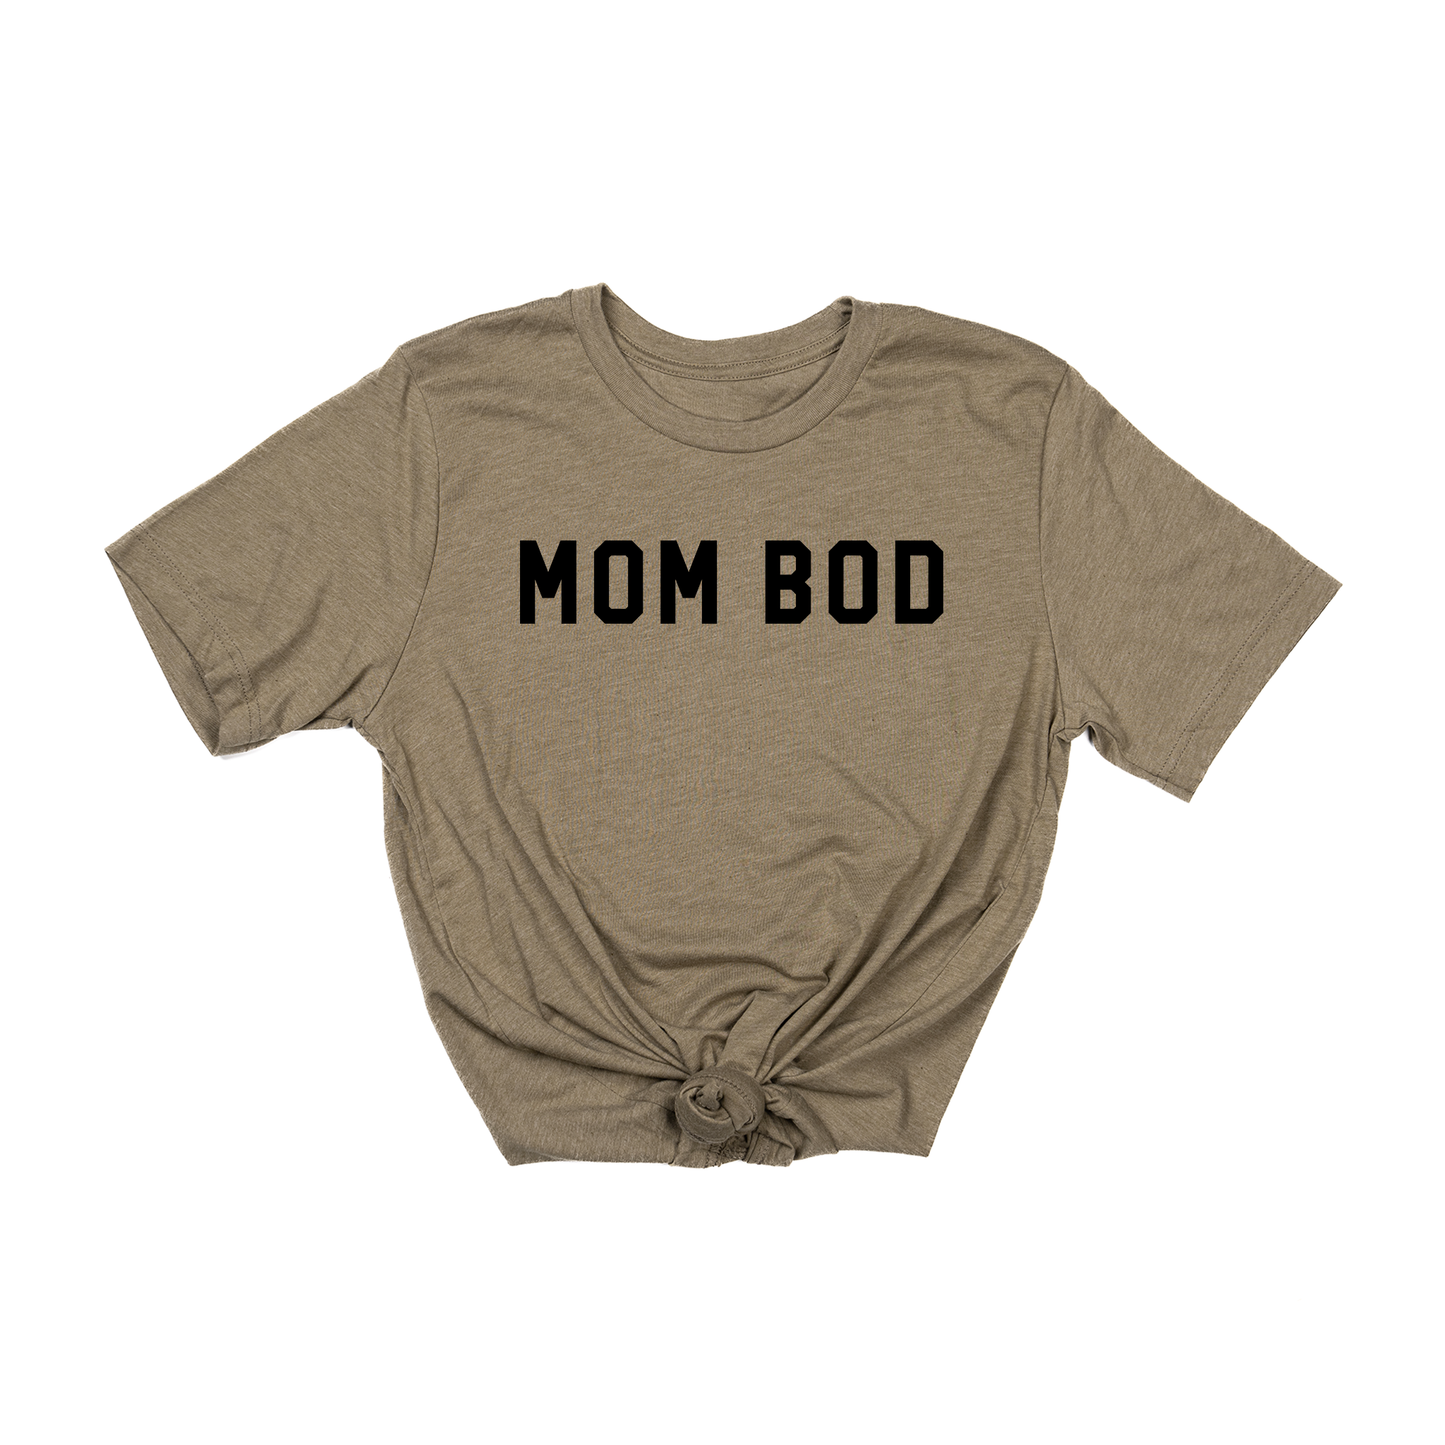 Mom Bod (Across Front, Black) - Tee (Olive)